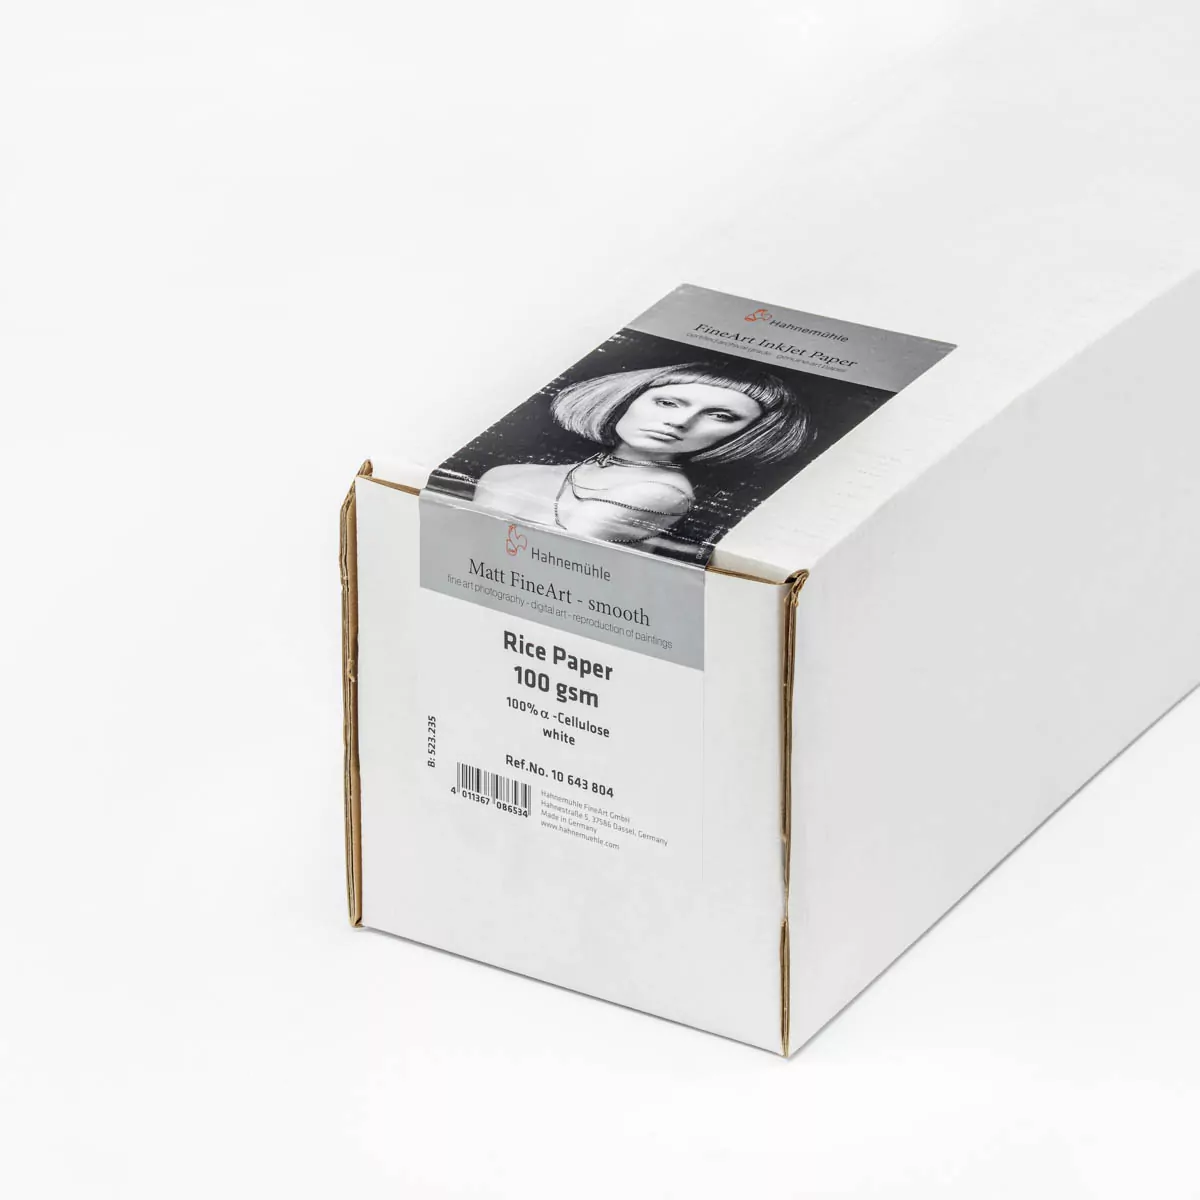 Hahnemuhle Rice Paper 100gsm 44"(111cm)x30m roll